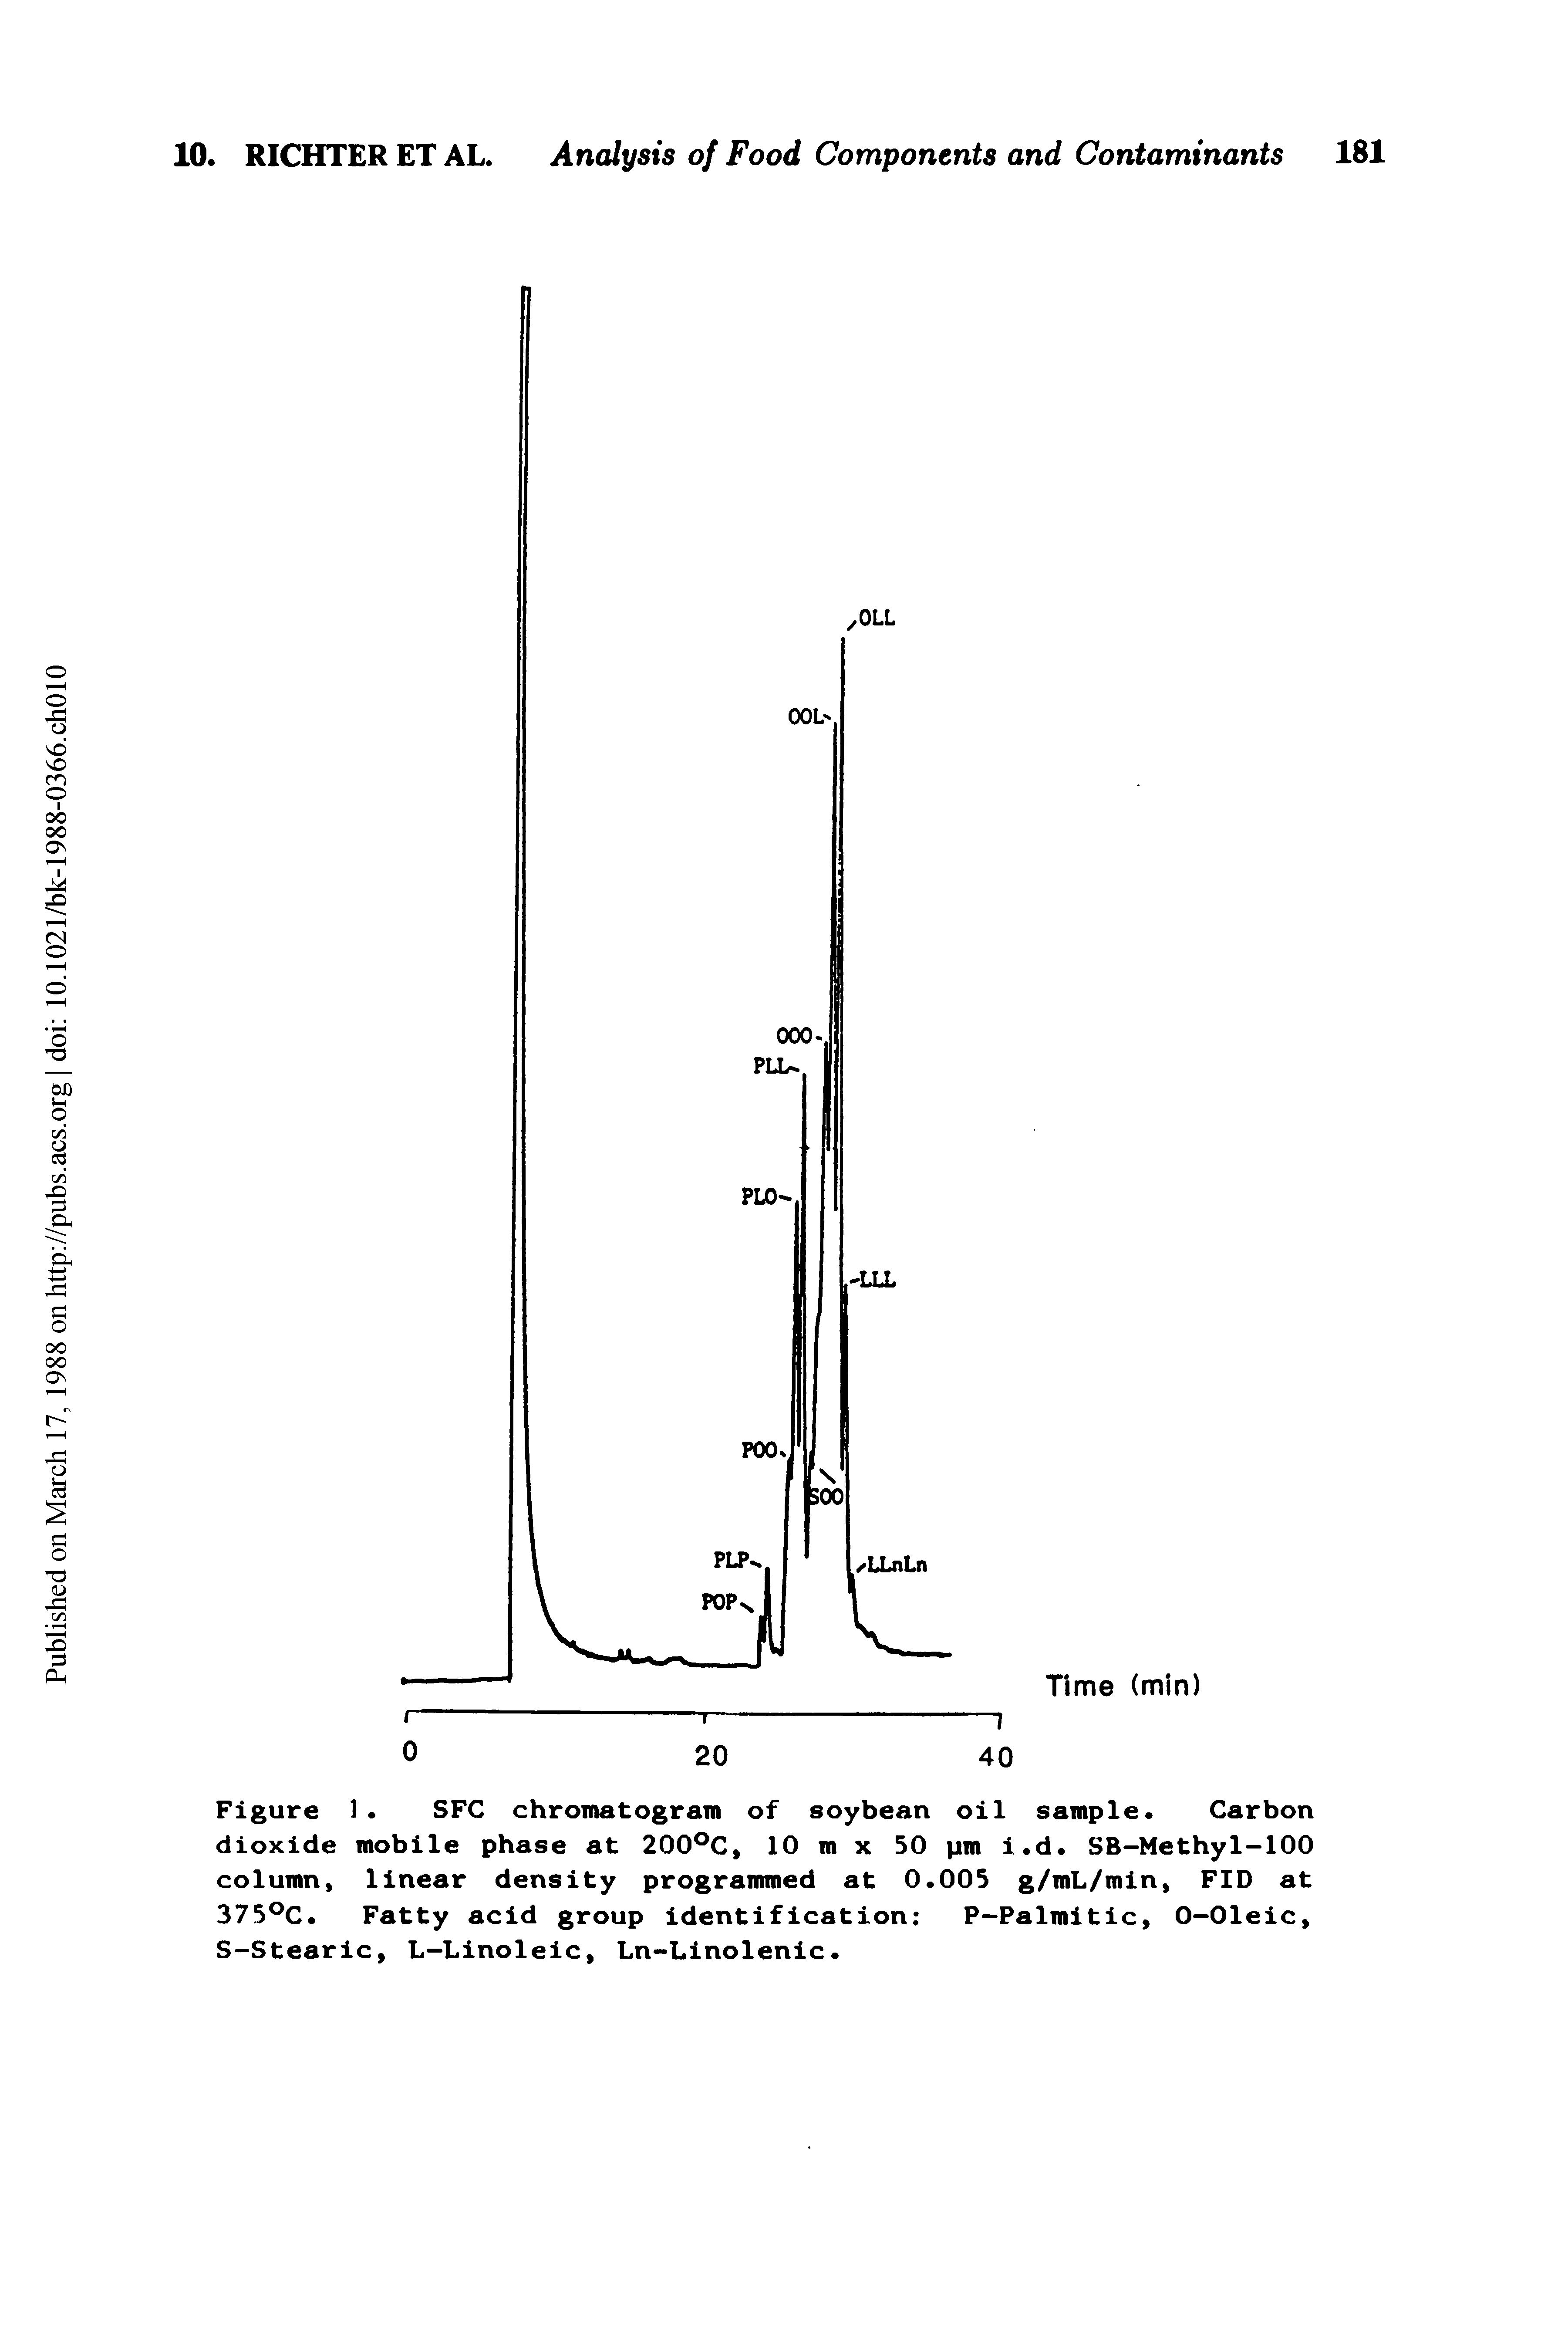 Figure 1 SFC chromatogram of soybean oil sample. Carbon dioxide mobile phase at 200 C, 10 m x 50 pm i.d. SB-Methyl-100 column, linear density programmed at 0.005 g/mL/min, FID at 375 C. Fatty acid group identification P-Palmitic, O-Oleic, S-Stearic, L-Linoleic, Ln-Linolenic.